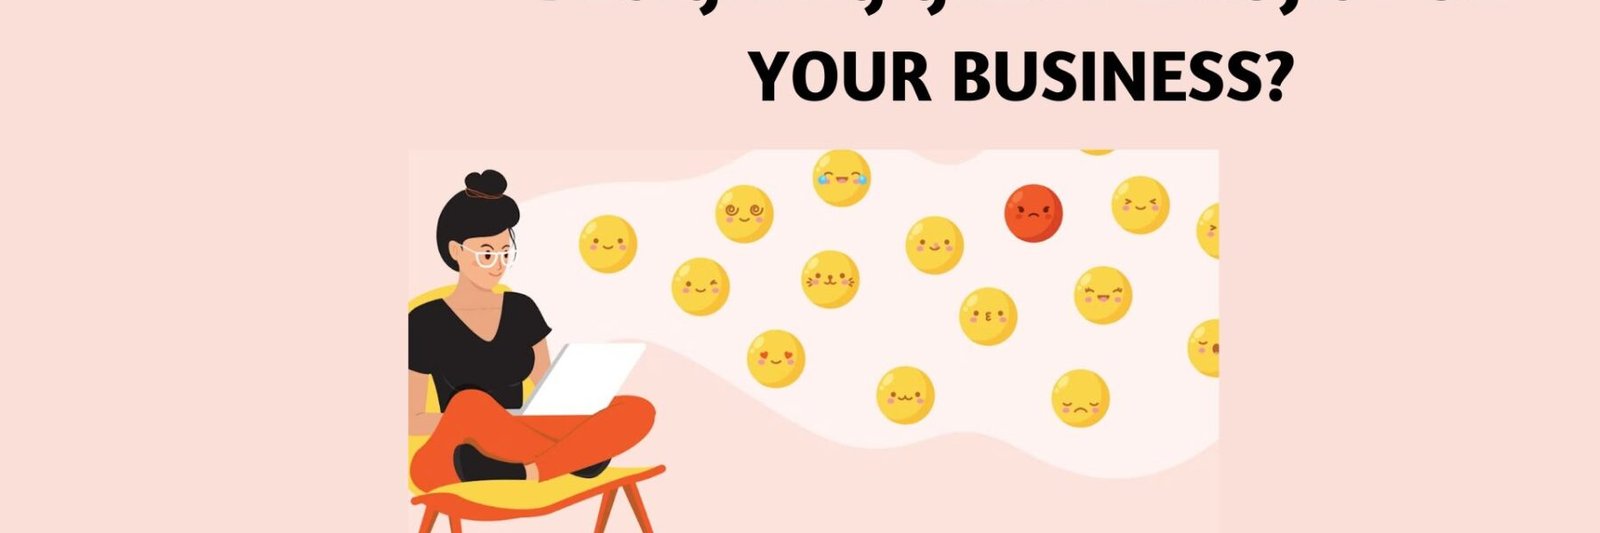 WHAT ARE THE TIPS FOR DESIGNING GREAT EMOJIS FOR YOUR BUSINESS